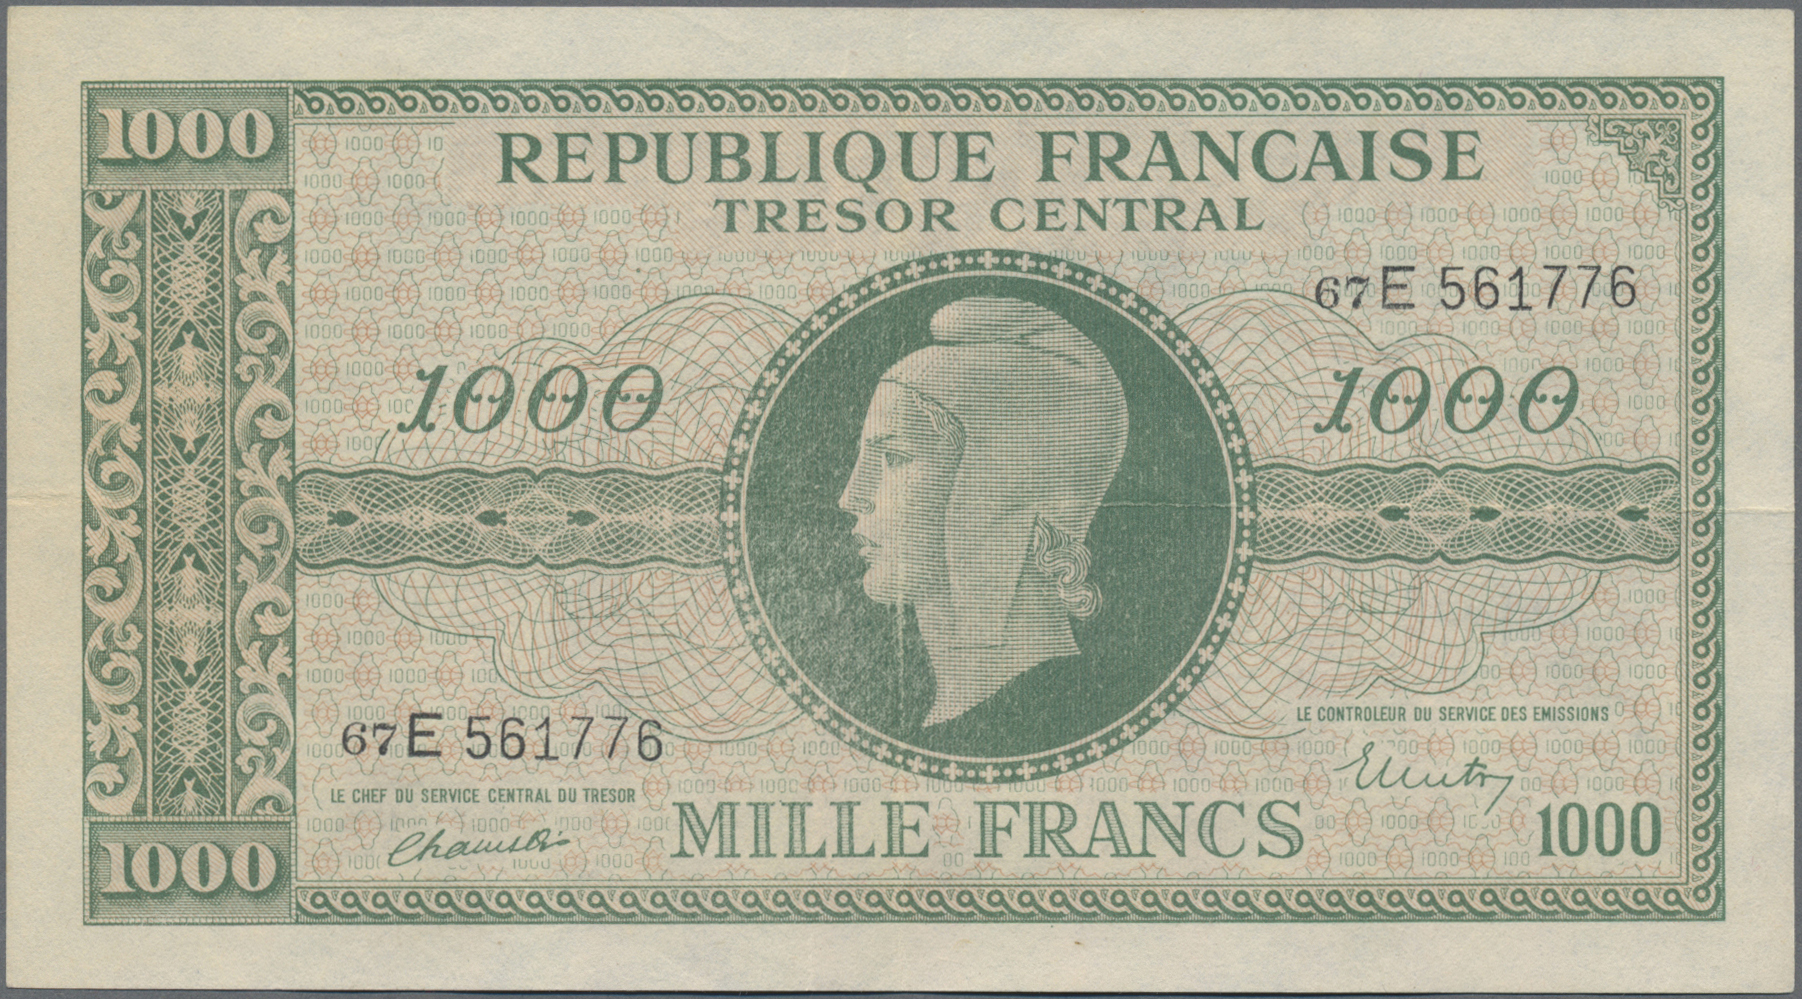 Lot 00389 - France / Frankreich | Banknoten  -  Auktionshaus Christoph Gärtner GmbH & Co. KG 54th AUCTION - Day 1 Coins & Banknotes